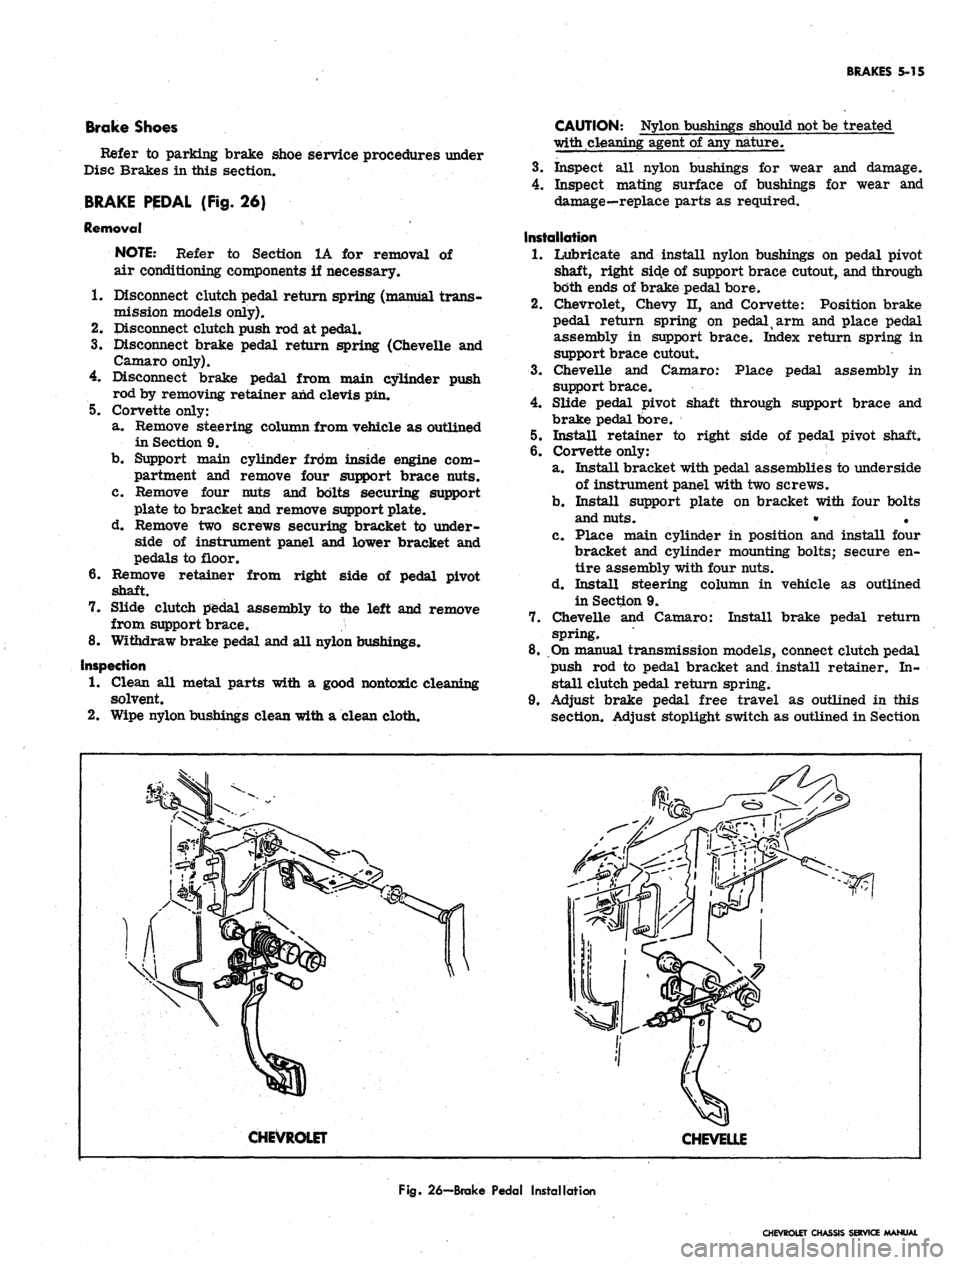 CHEVROLET CAMARO 1967 1.G Chassis Repair Manual 
BRAKES 5-15

Brake Shoes

Refer to parking brake shoe service procedures under

Disc Brakes in this section.

BRAKE PEDAL (Fig. 26)

Removal

NOTE: Refer to Section 1A for removal

air conditioning c